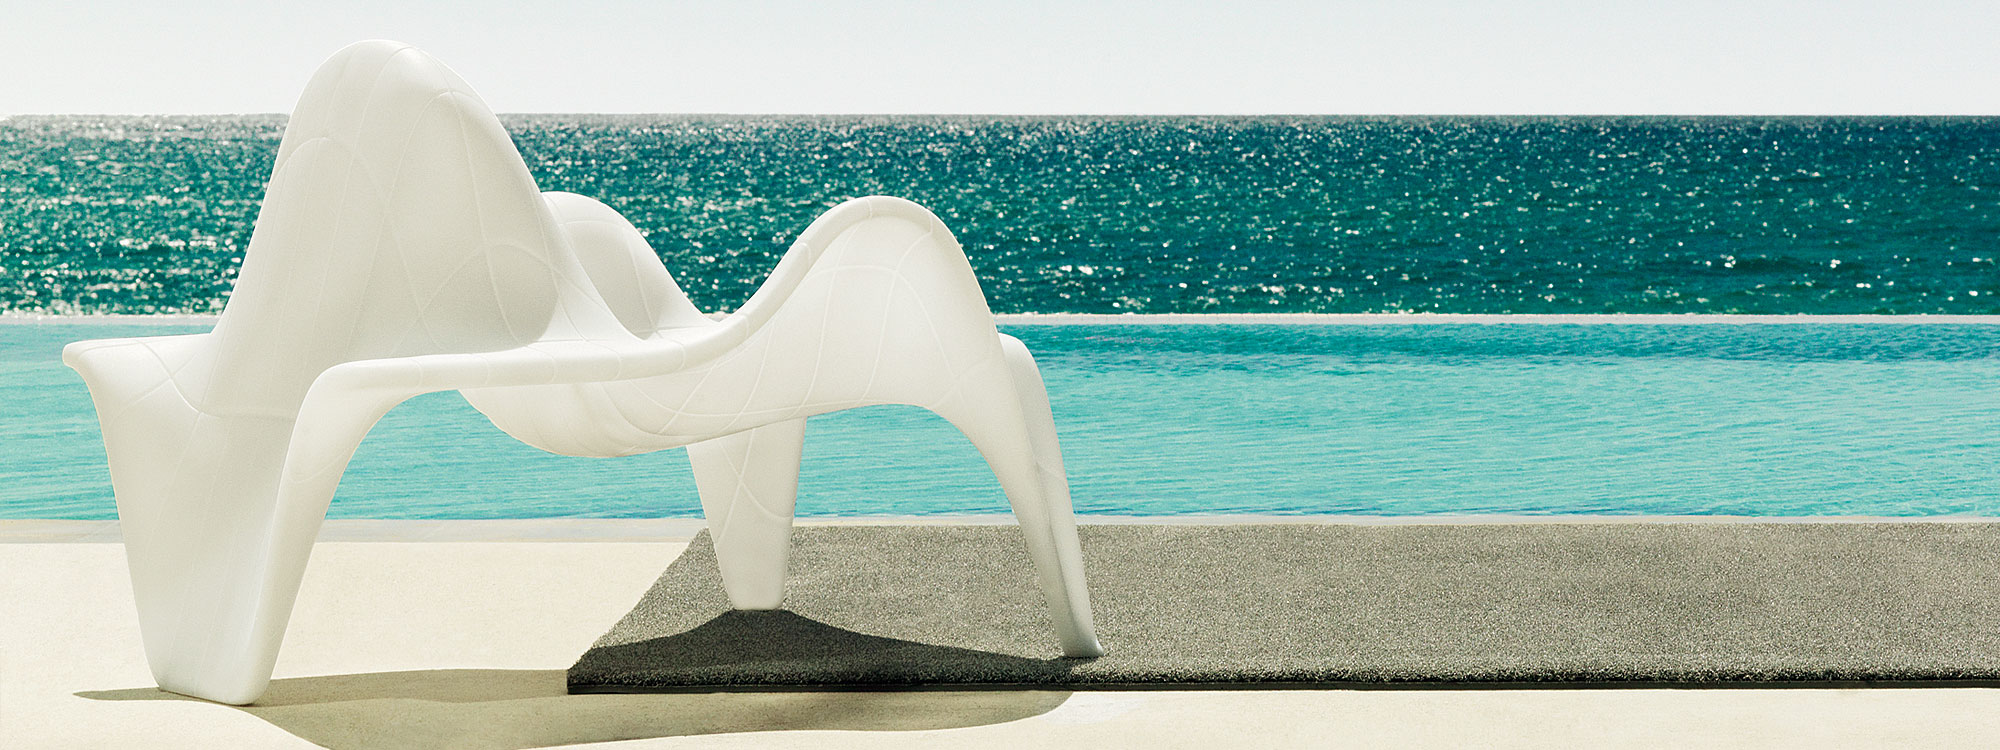 Image of Vondom F3 modern outdoor lounge chair in white roto-molded polyethylene with swimming pool, blue sea and sky in the background